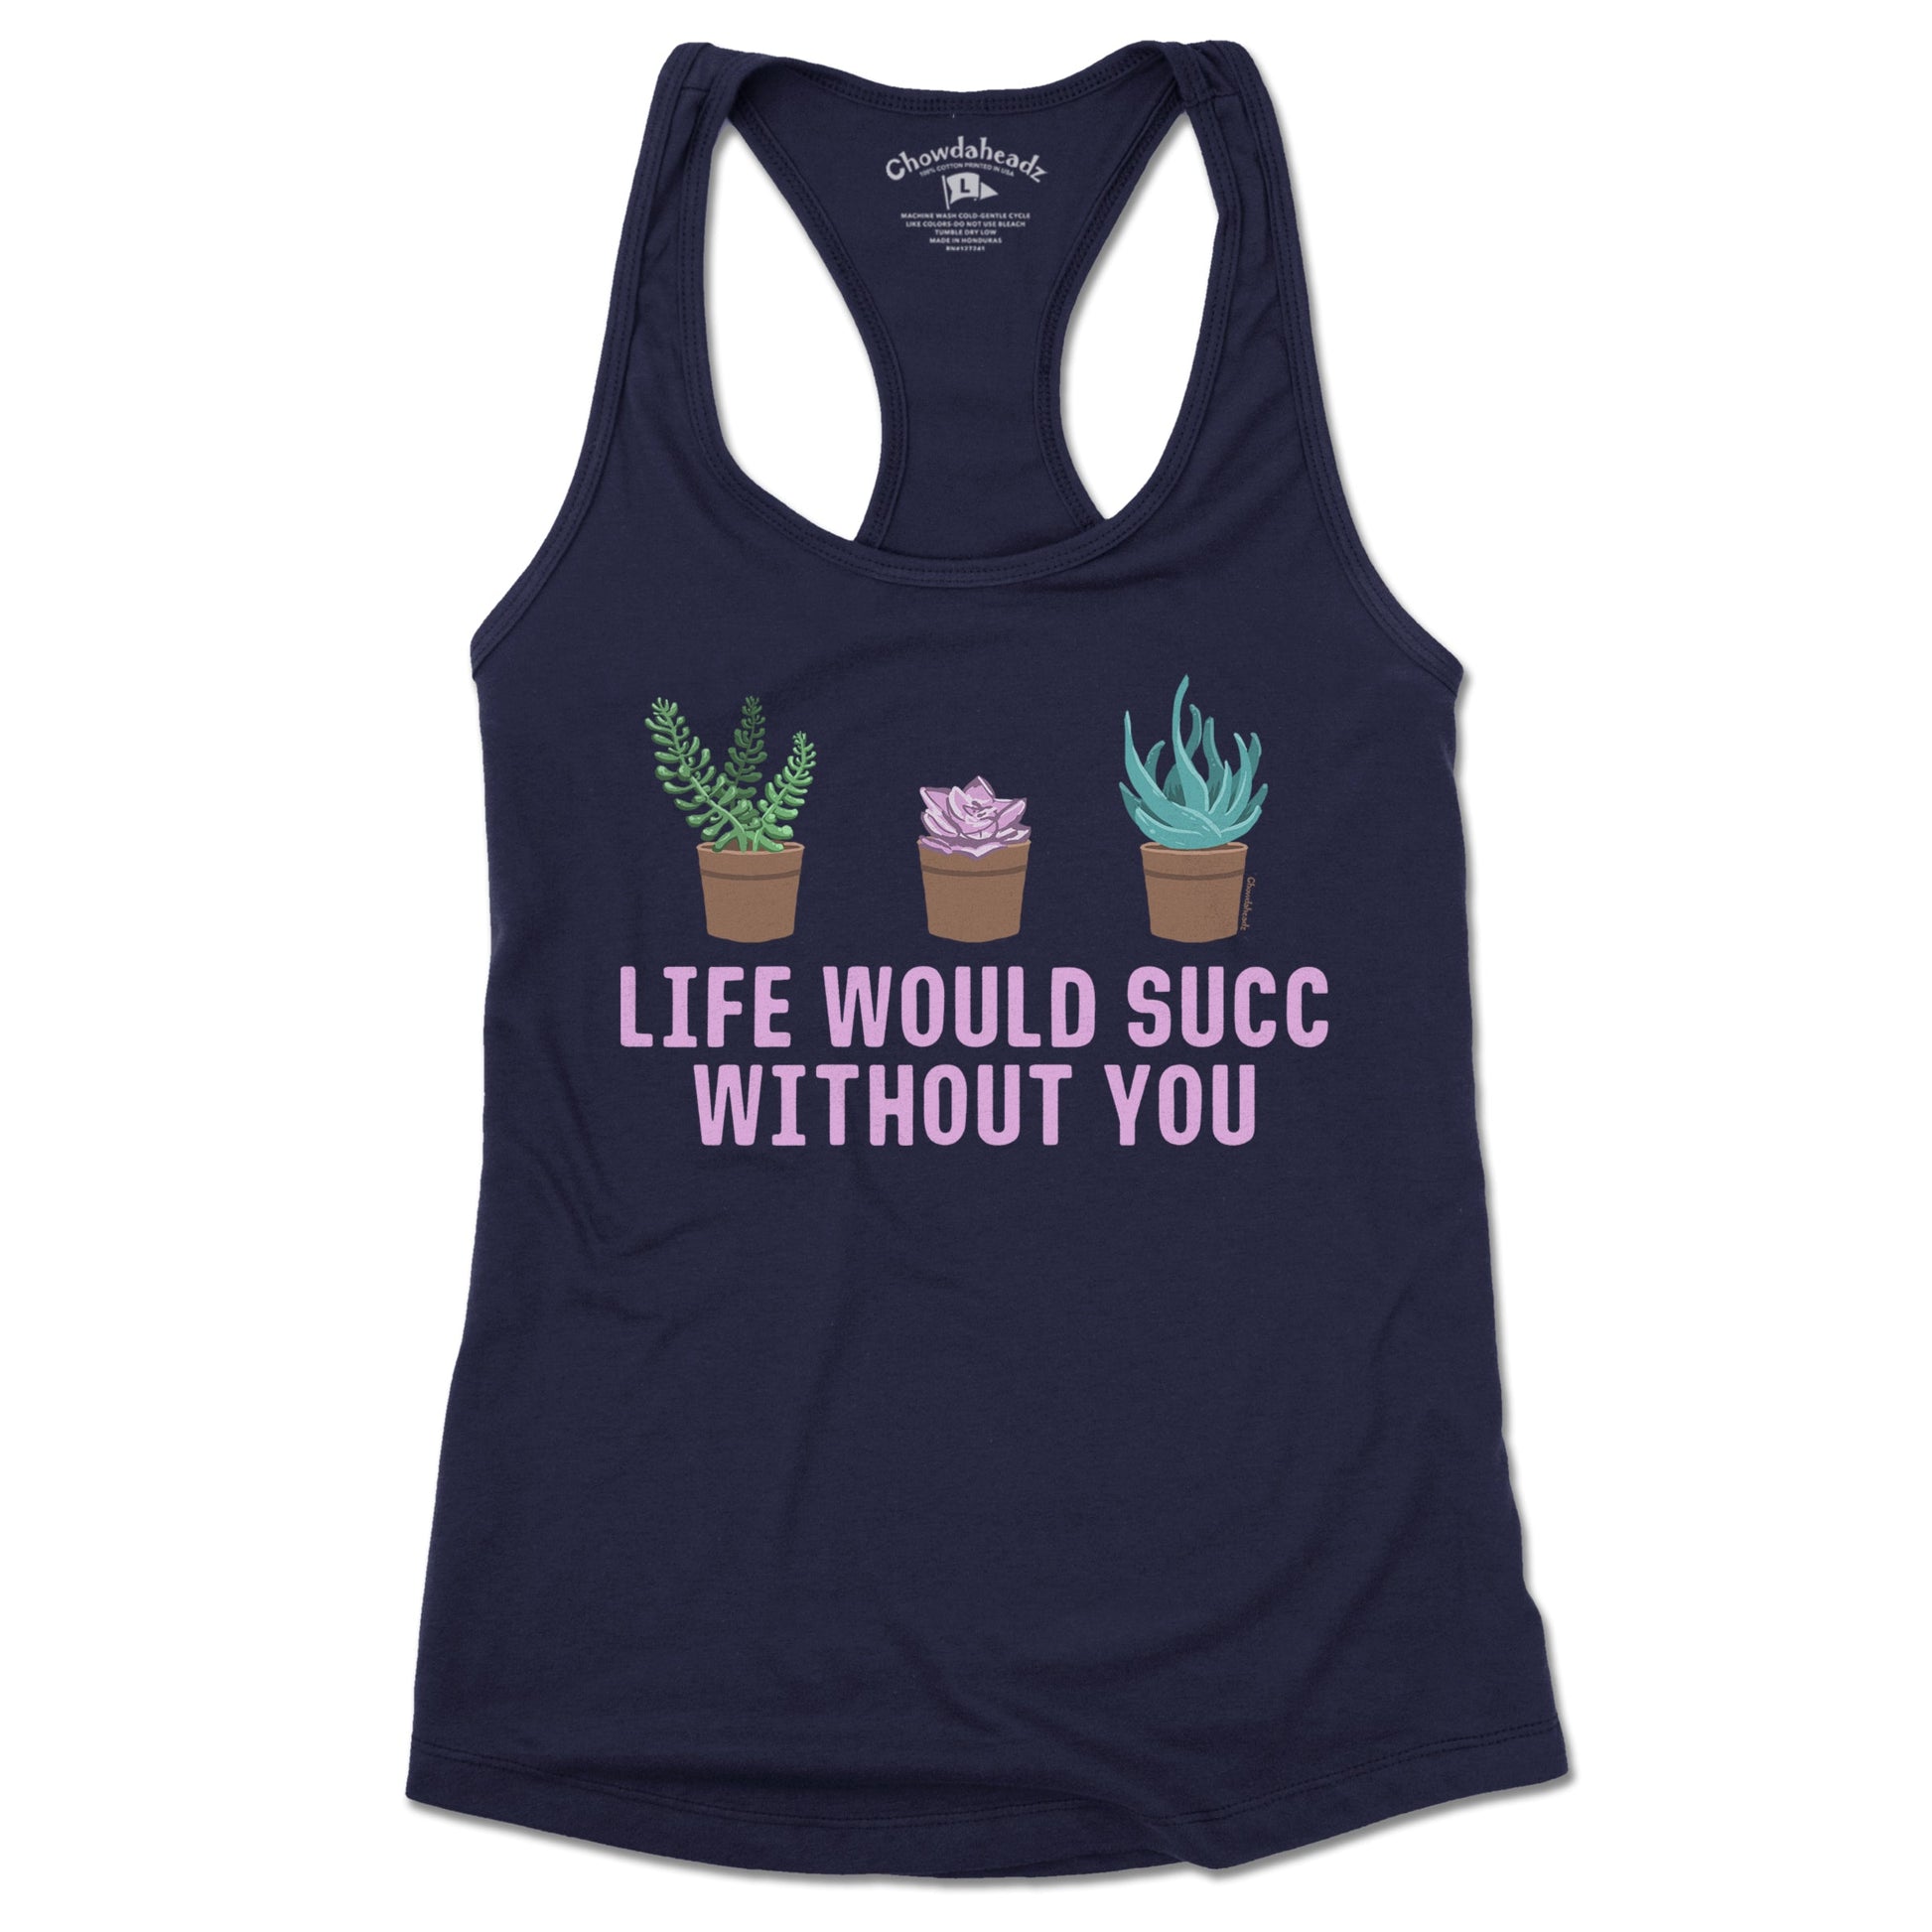 Life Would Succ Without You Ladies Tank Top - Chowdaheadz